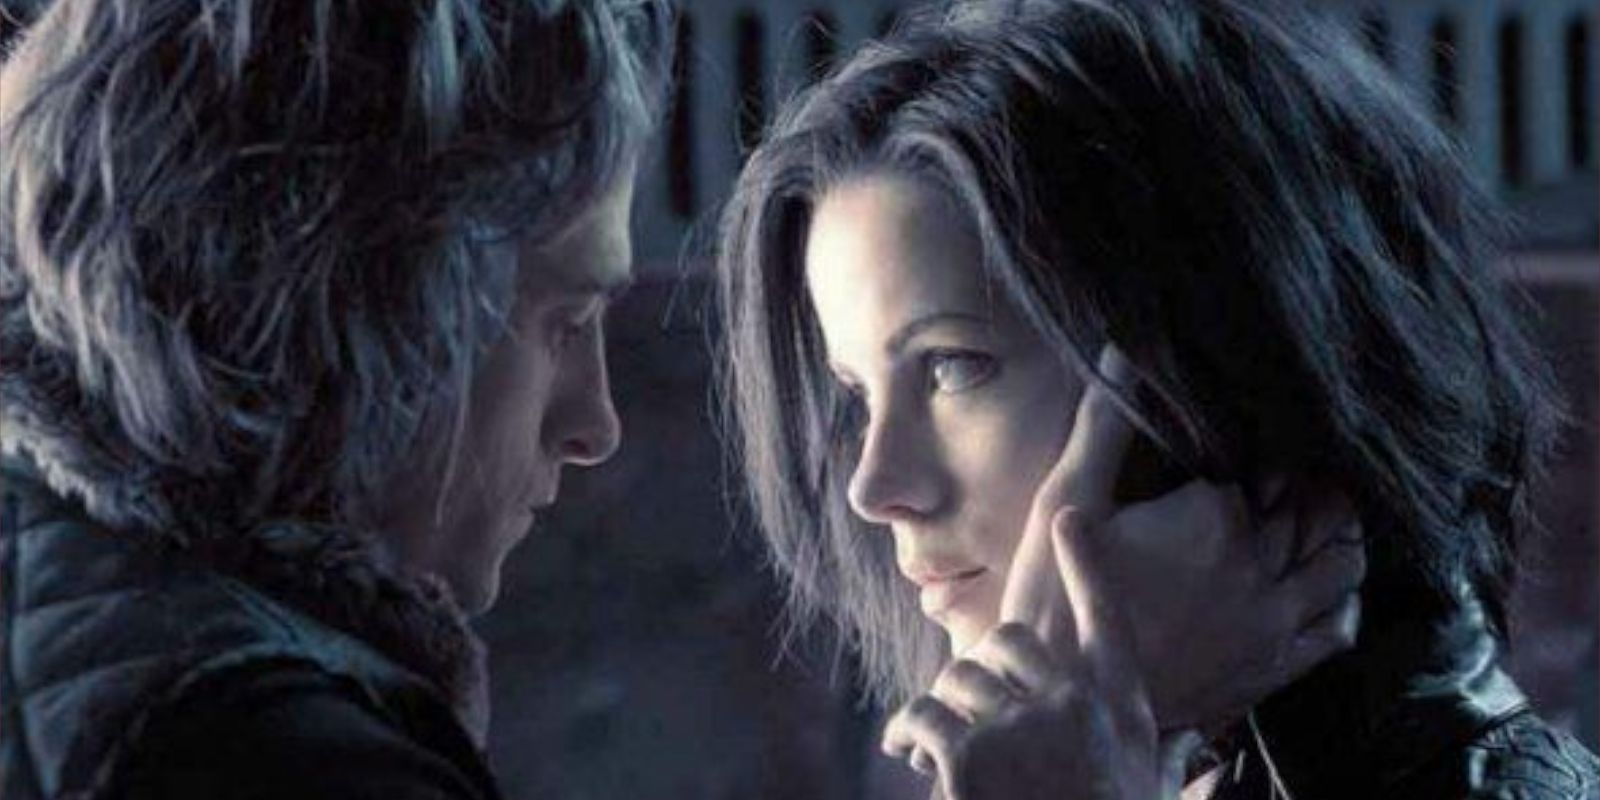 Selene and Michael in Underworld Looking at each other